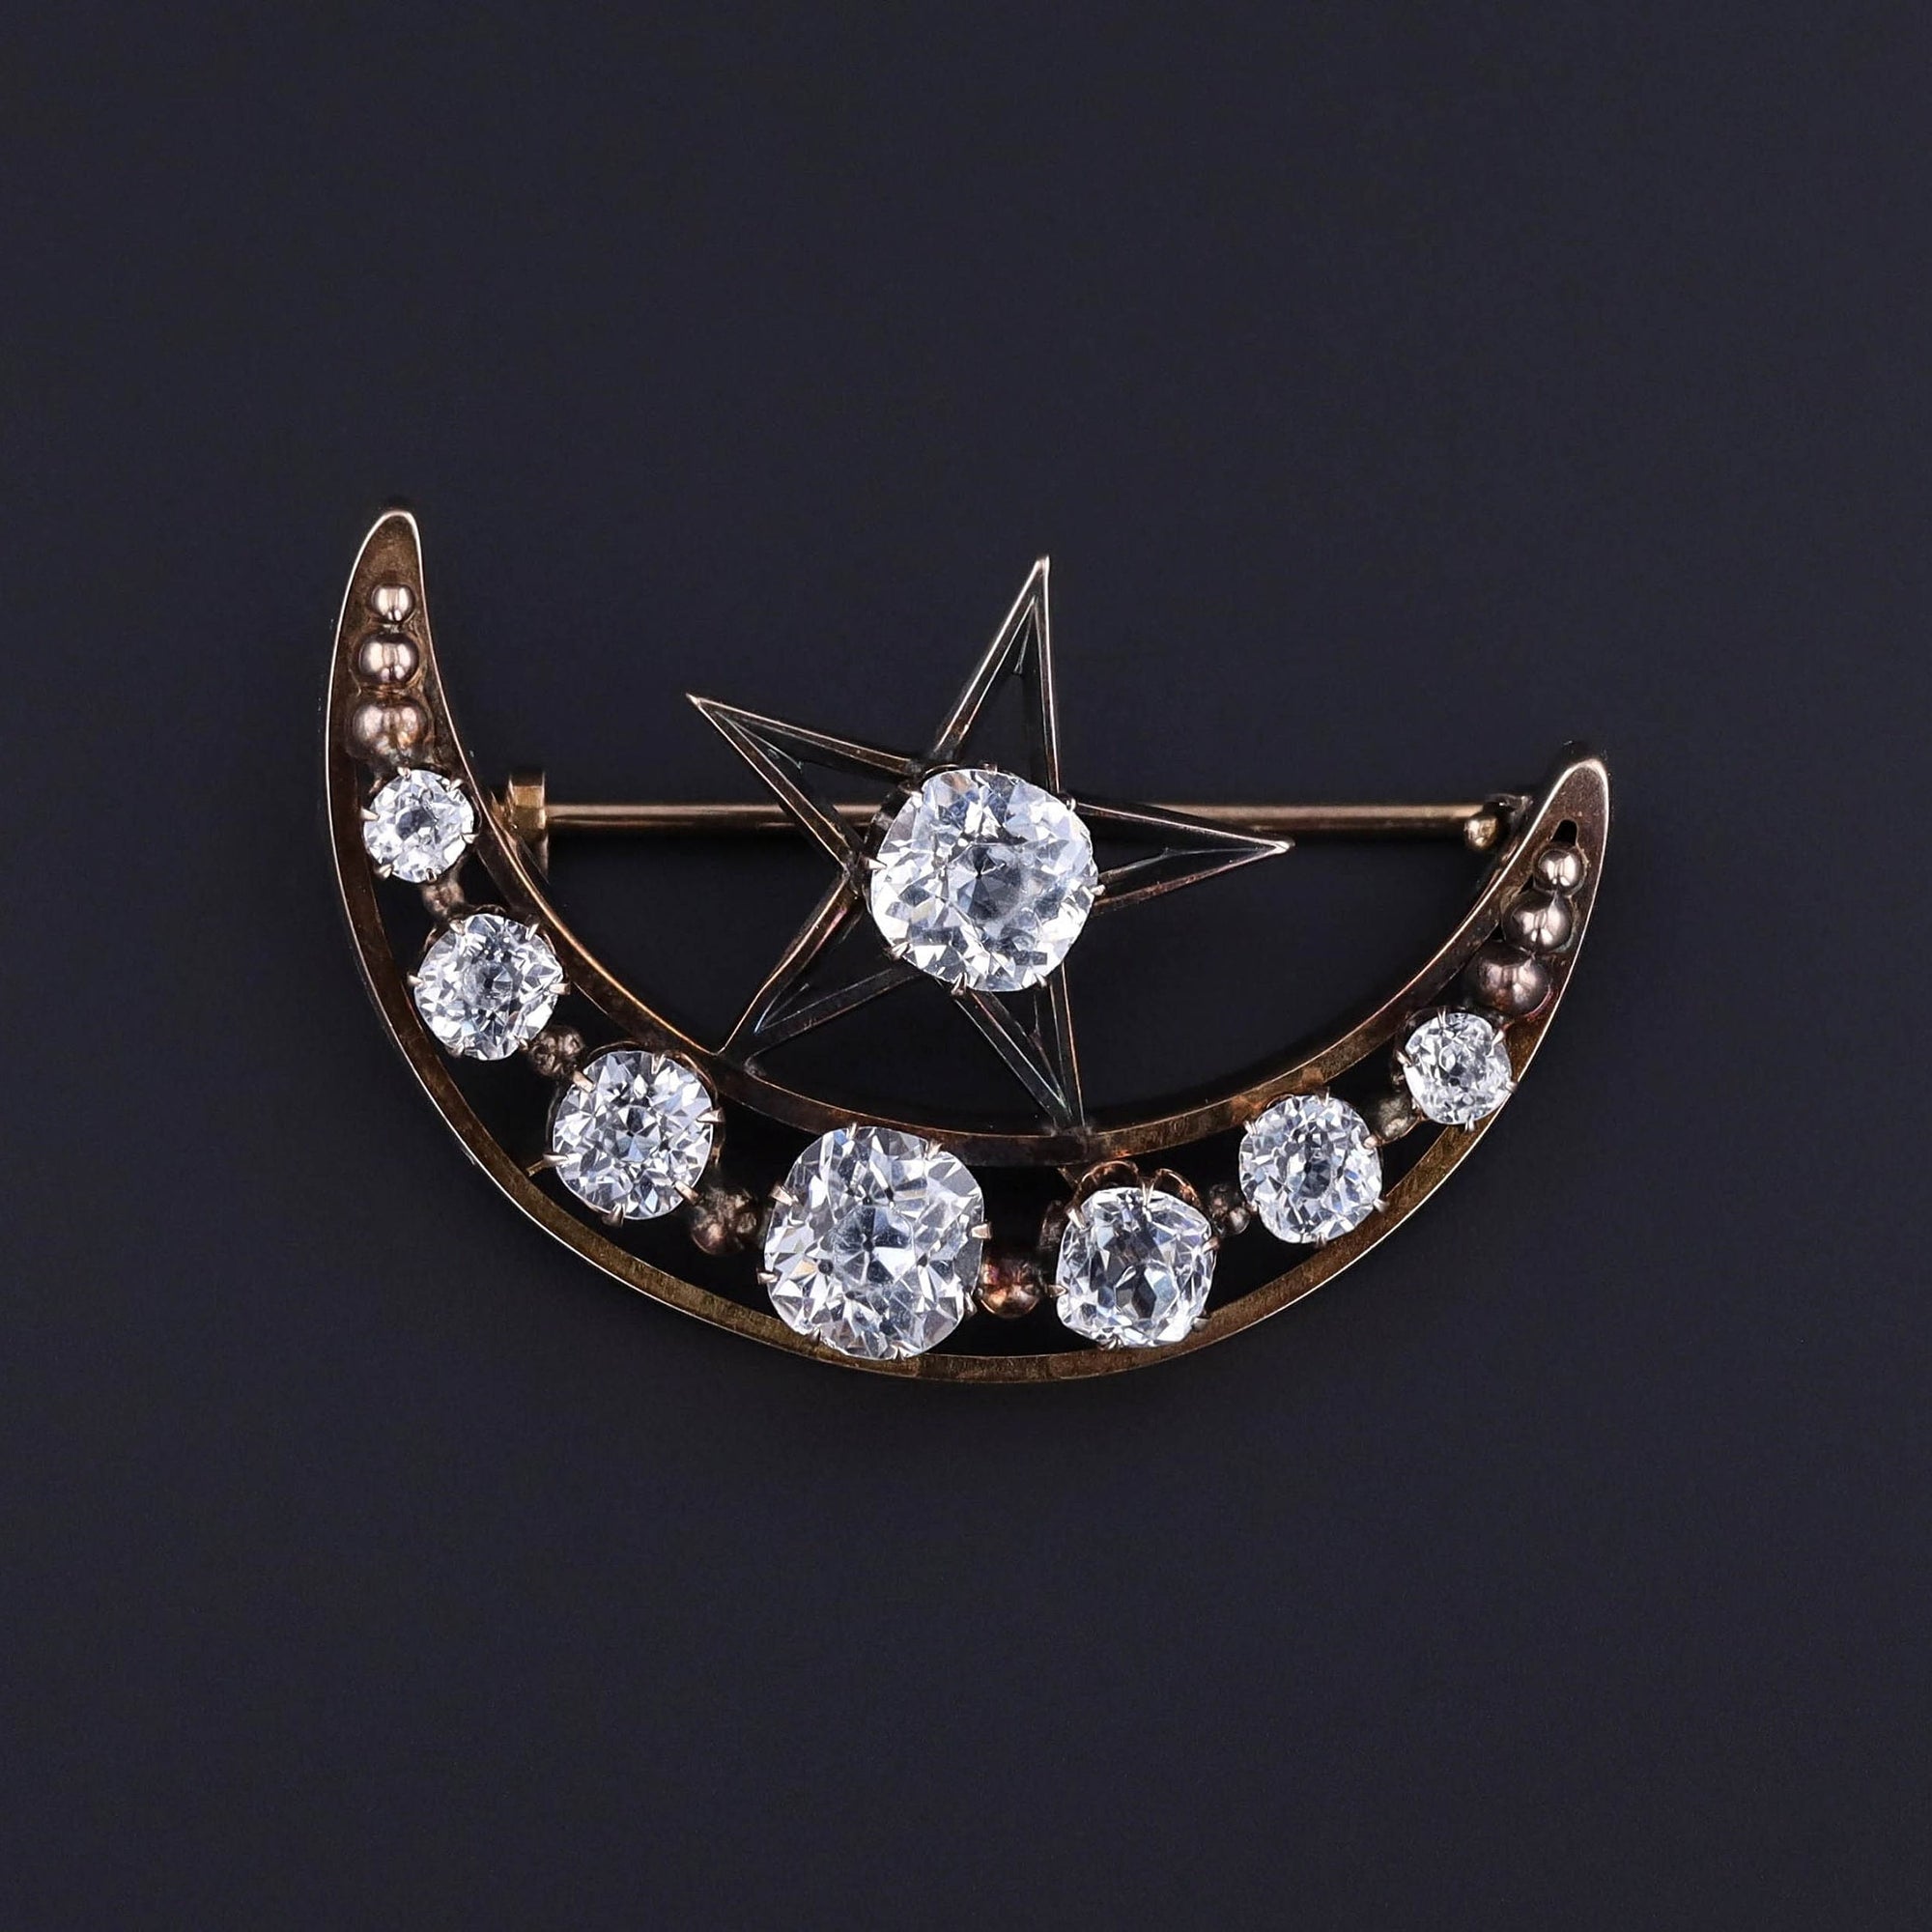 Antique Paste Crescent Moon and Star Brooch of 9ct Gold